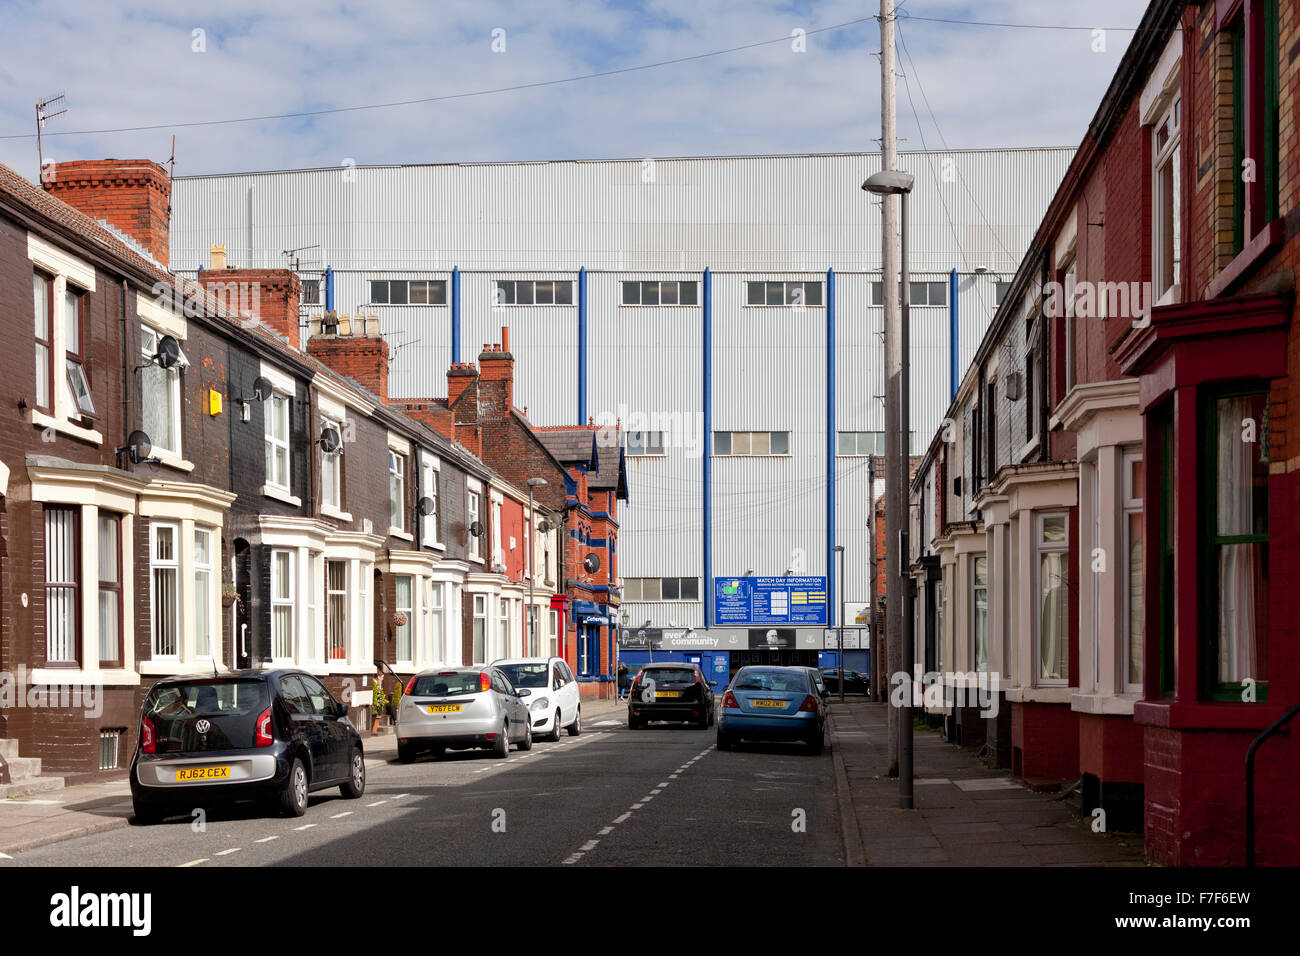 Images documentaires, FC Everton Goodison du Liverpool FC, Anfield, Liverpool, Angleterre Banque D'Images